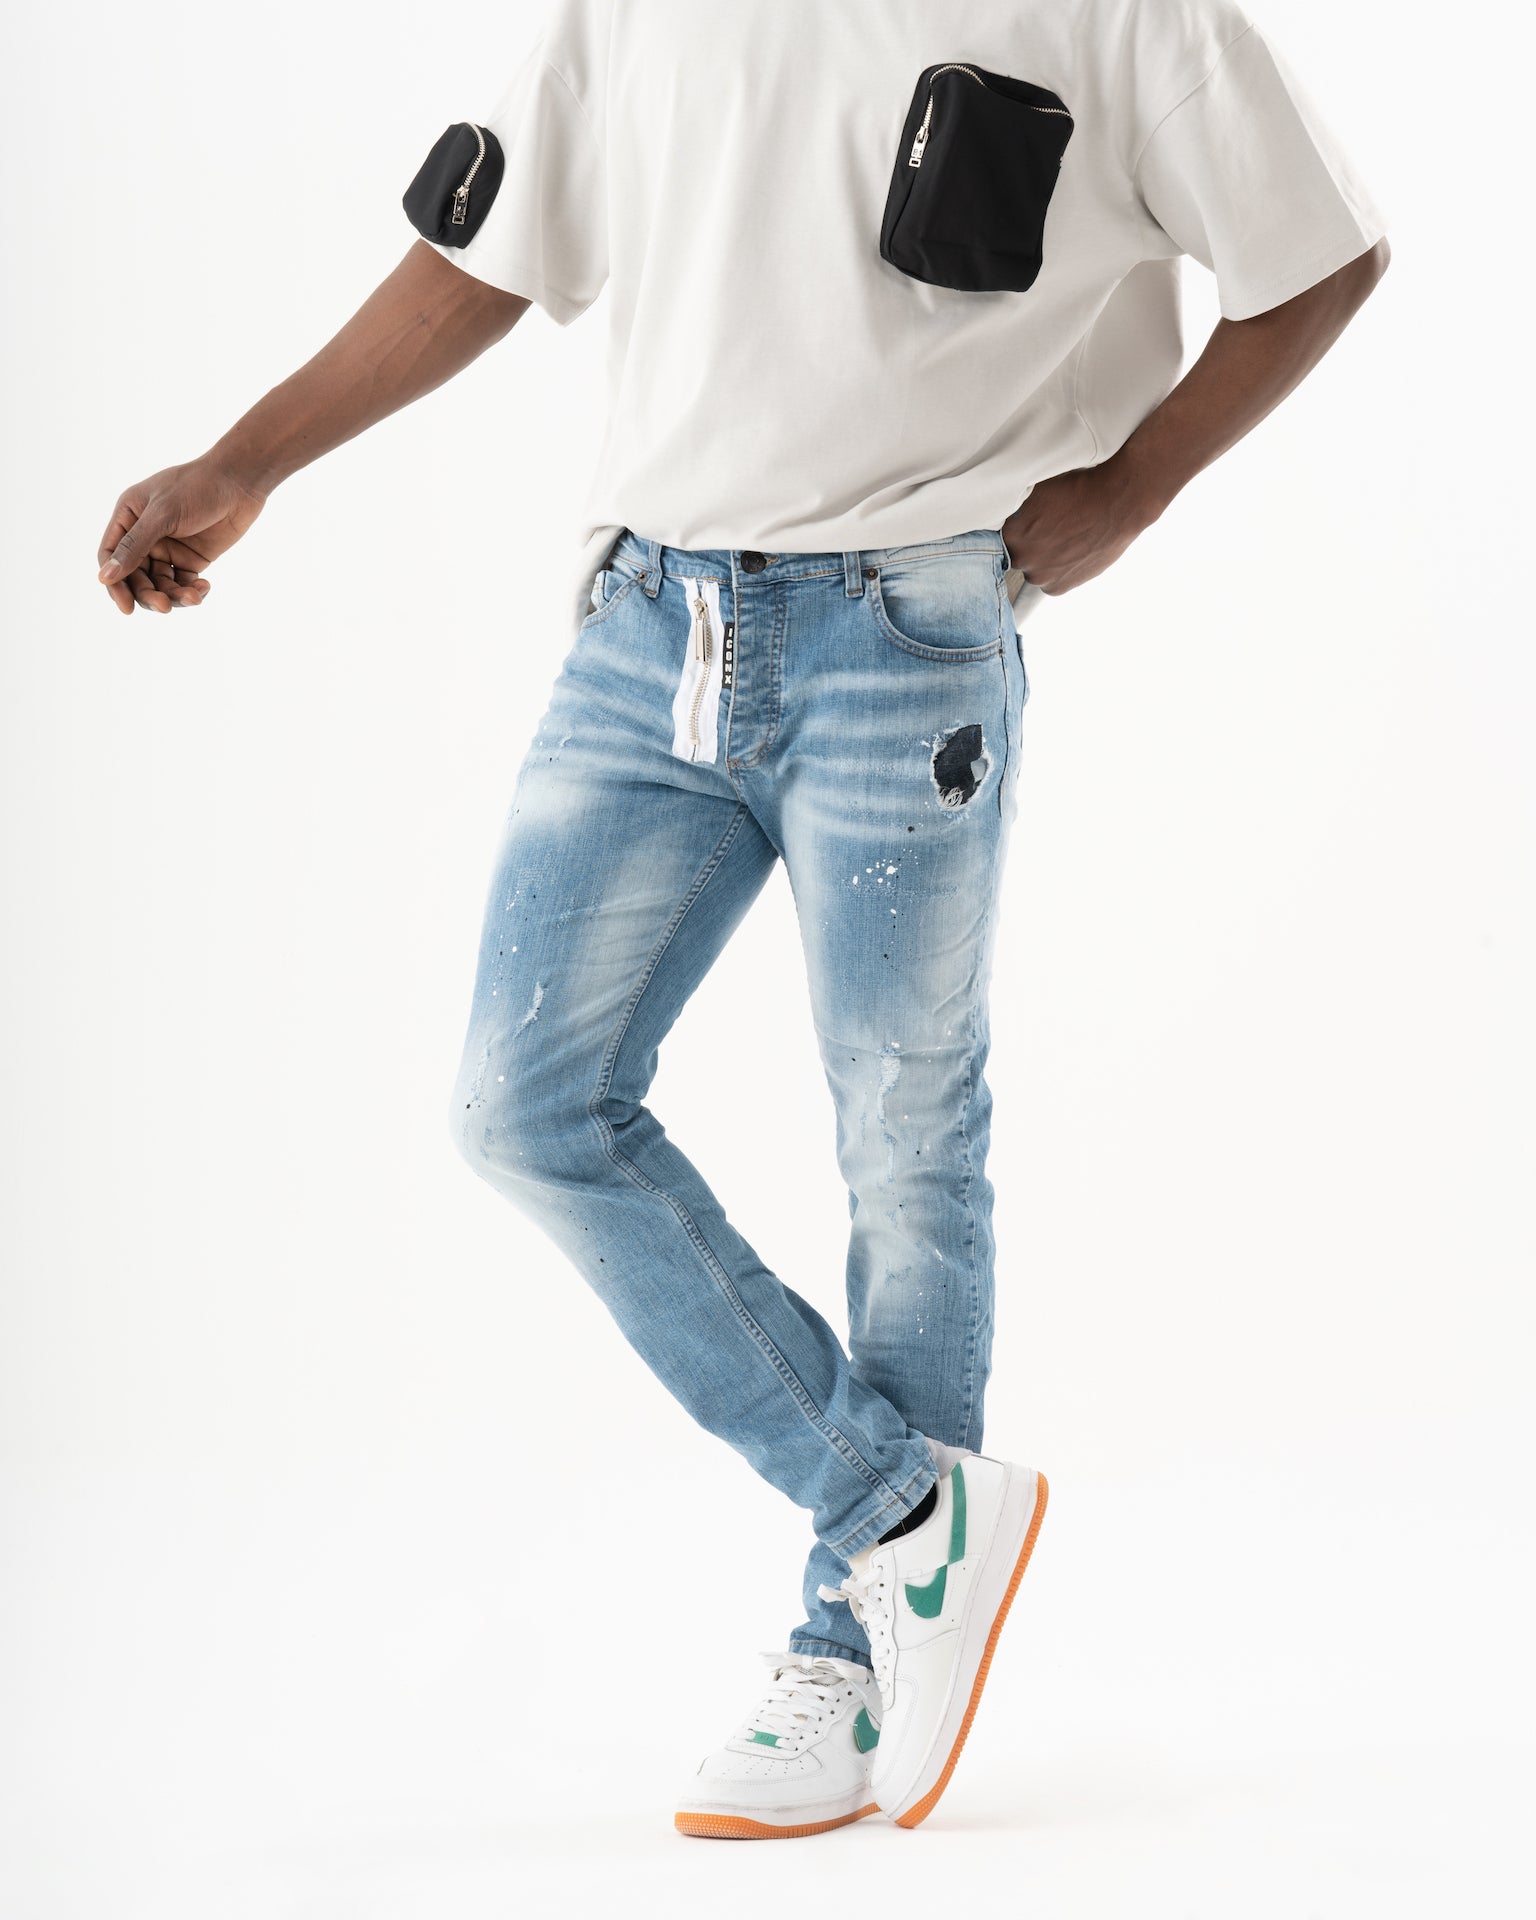 A man wearing a SKATER t - shirt and blue jeans.